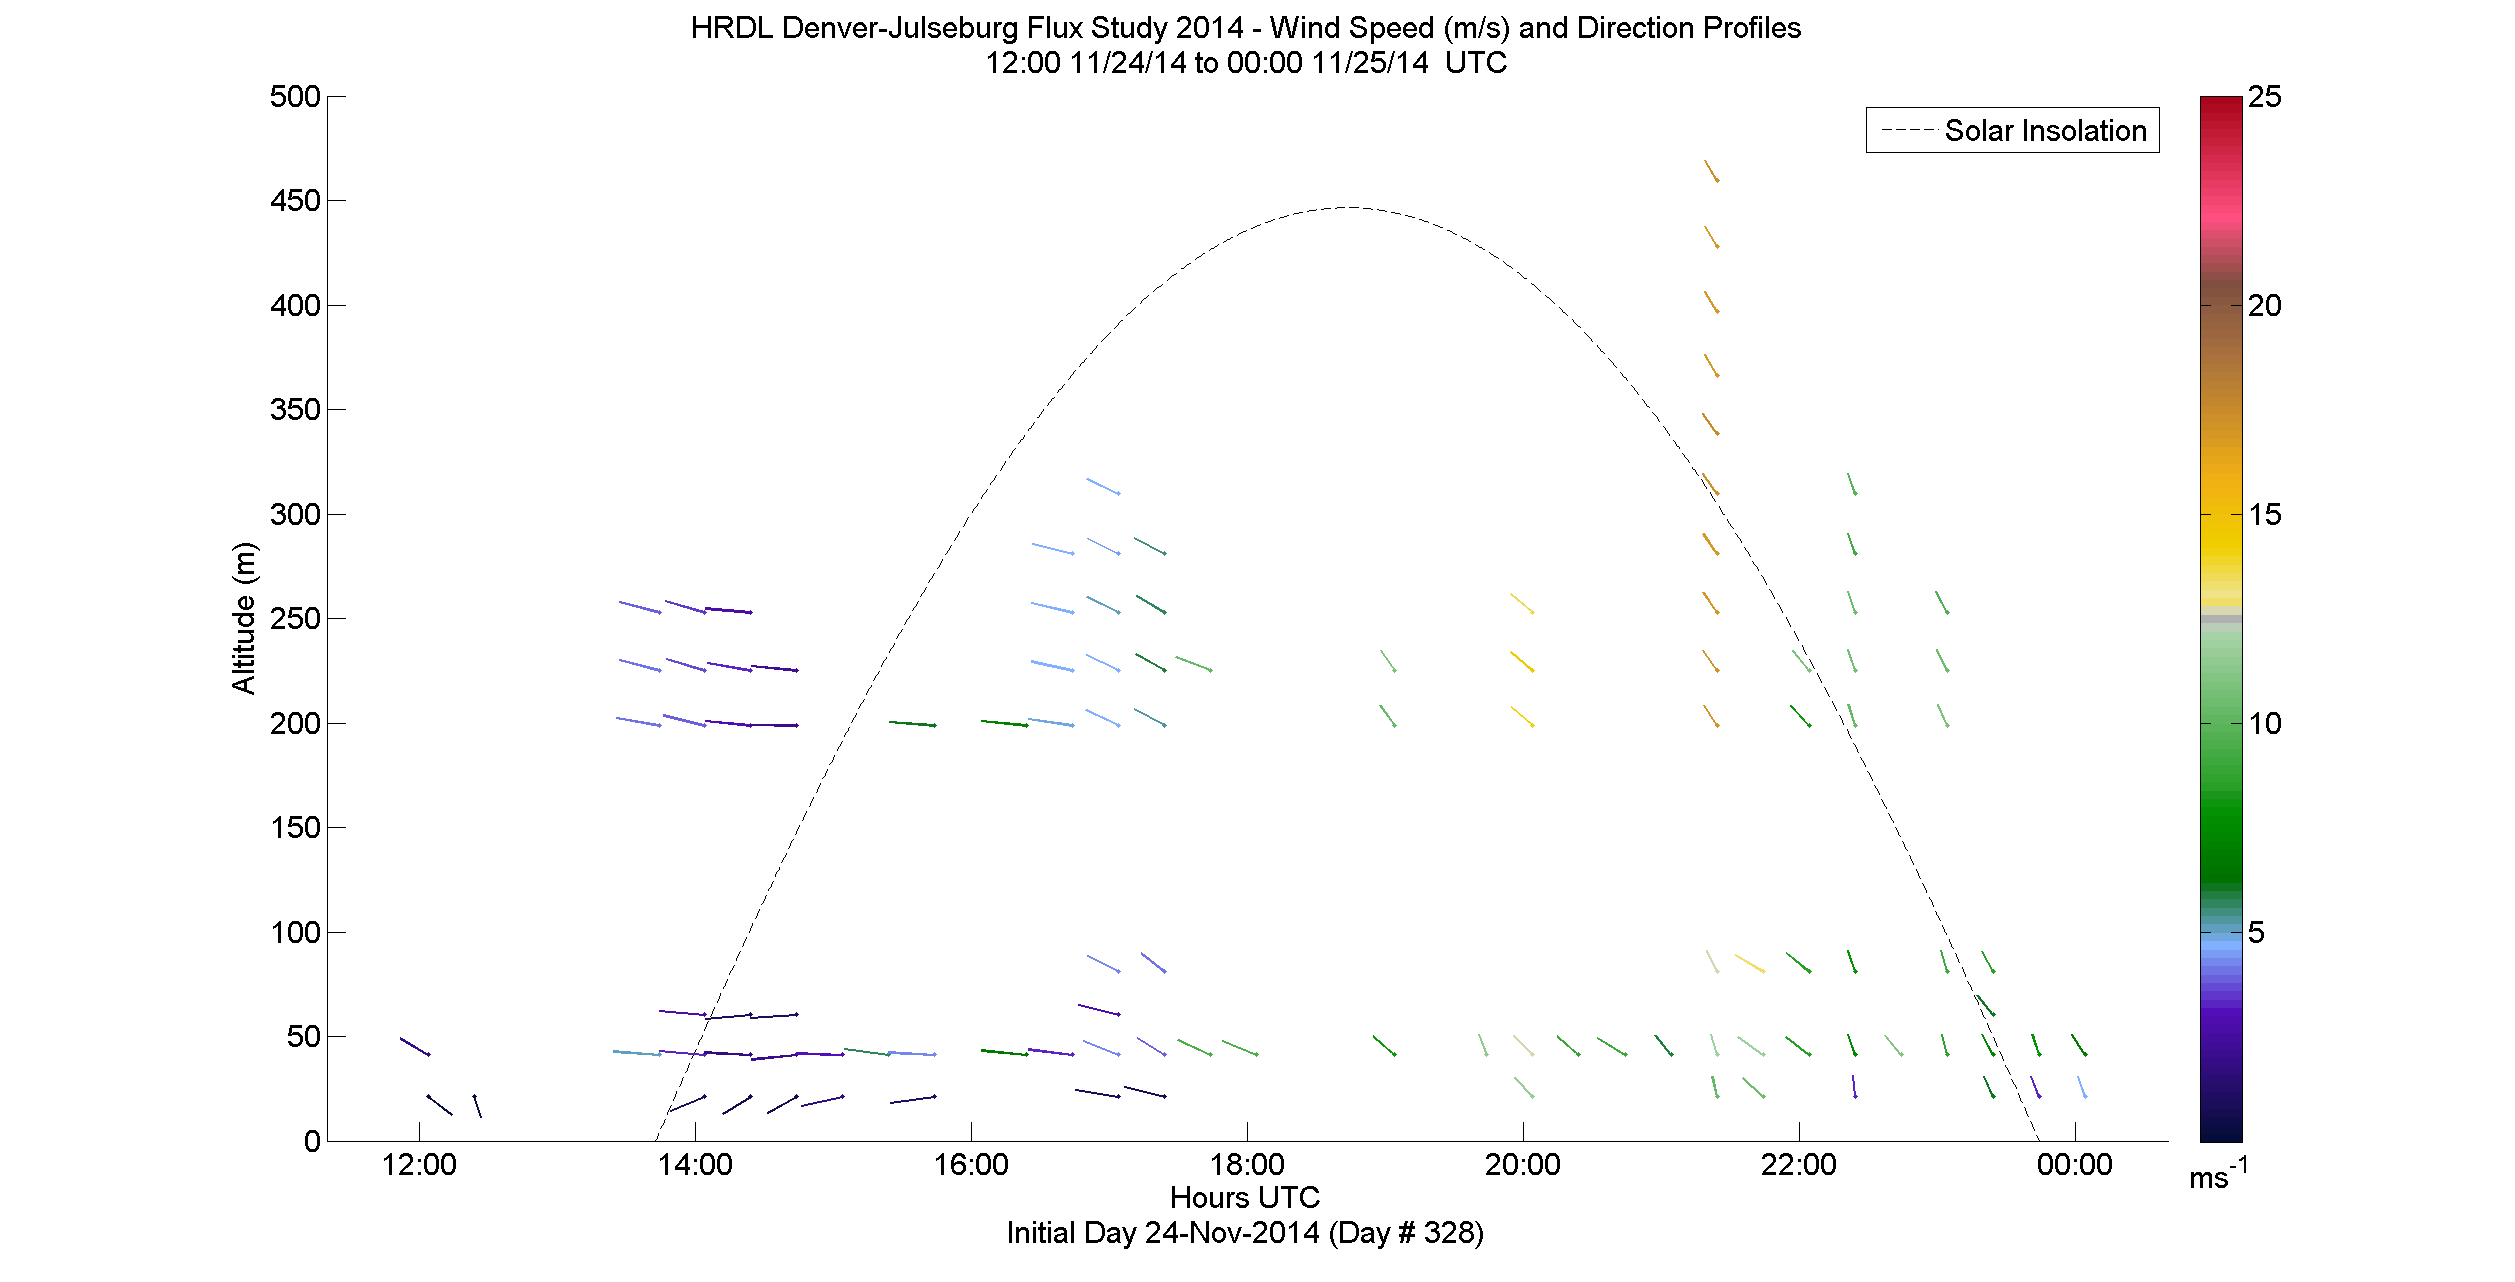 HRDL speed and direction profile - November 24 pm